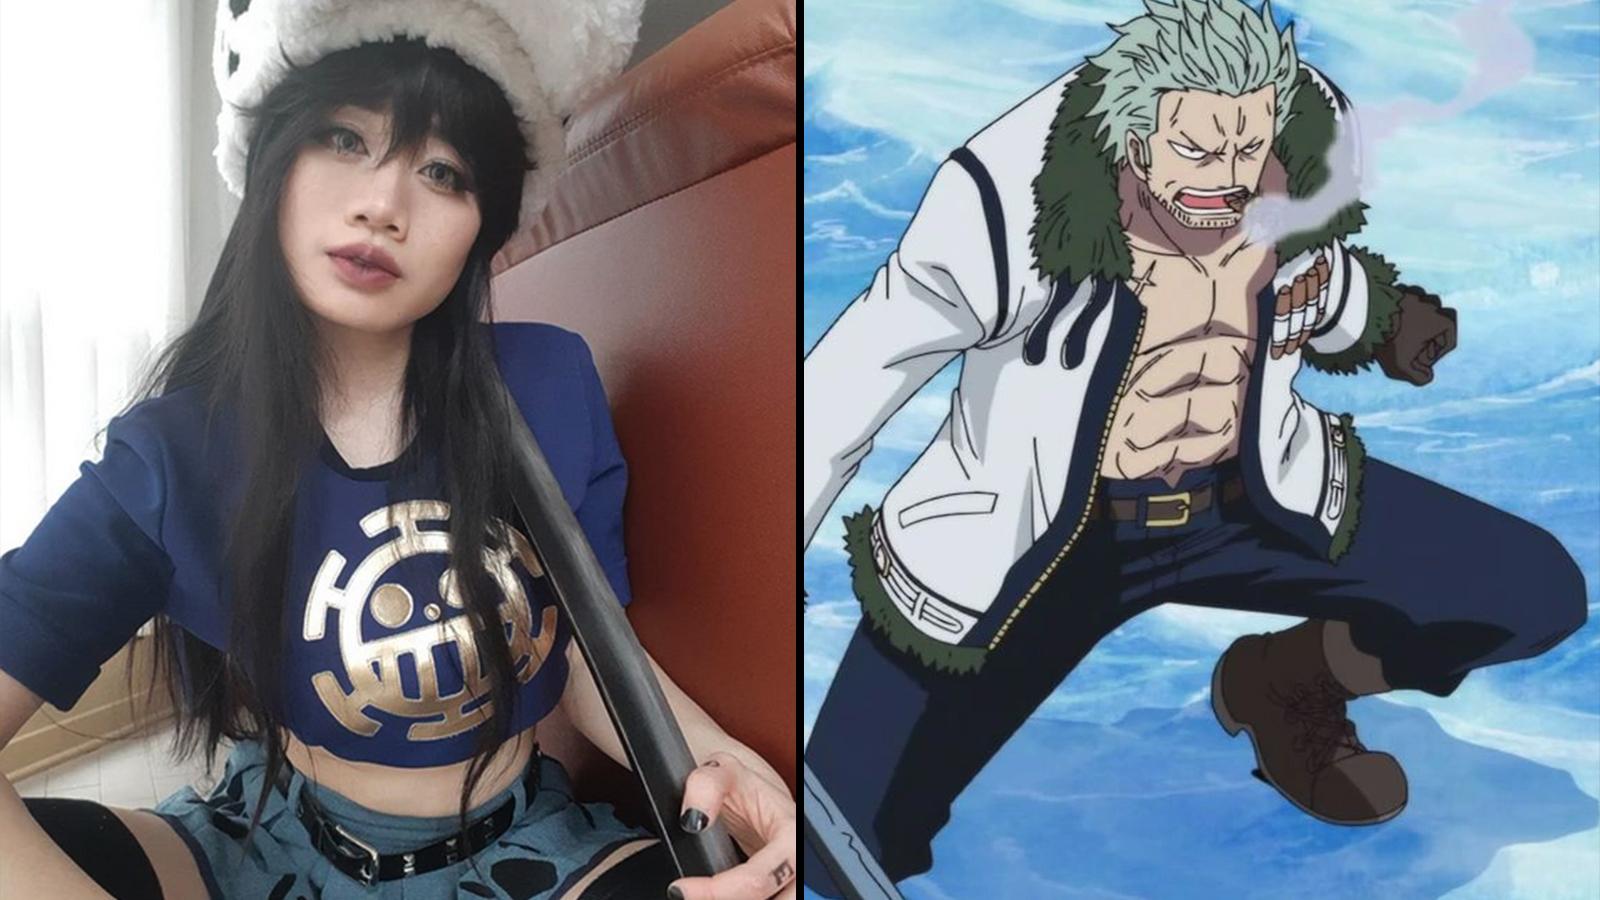 Genderbent One Piece Cosplay Proves Luffy Can Be Done On The Fly